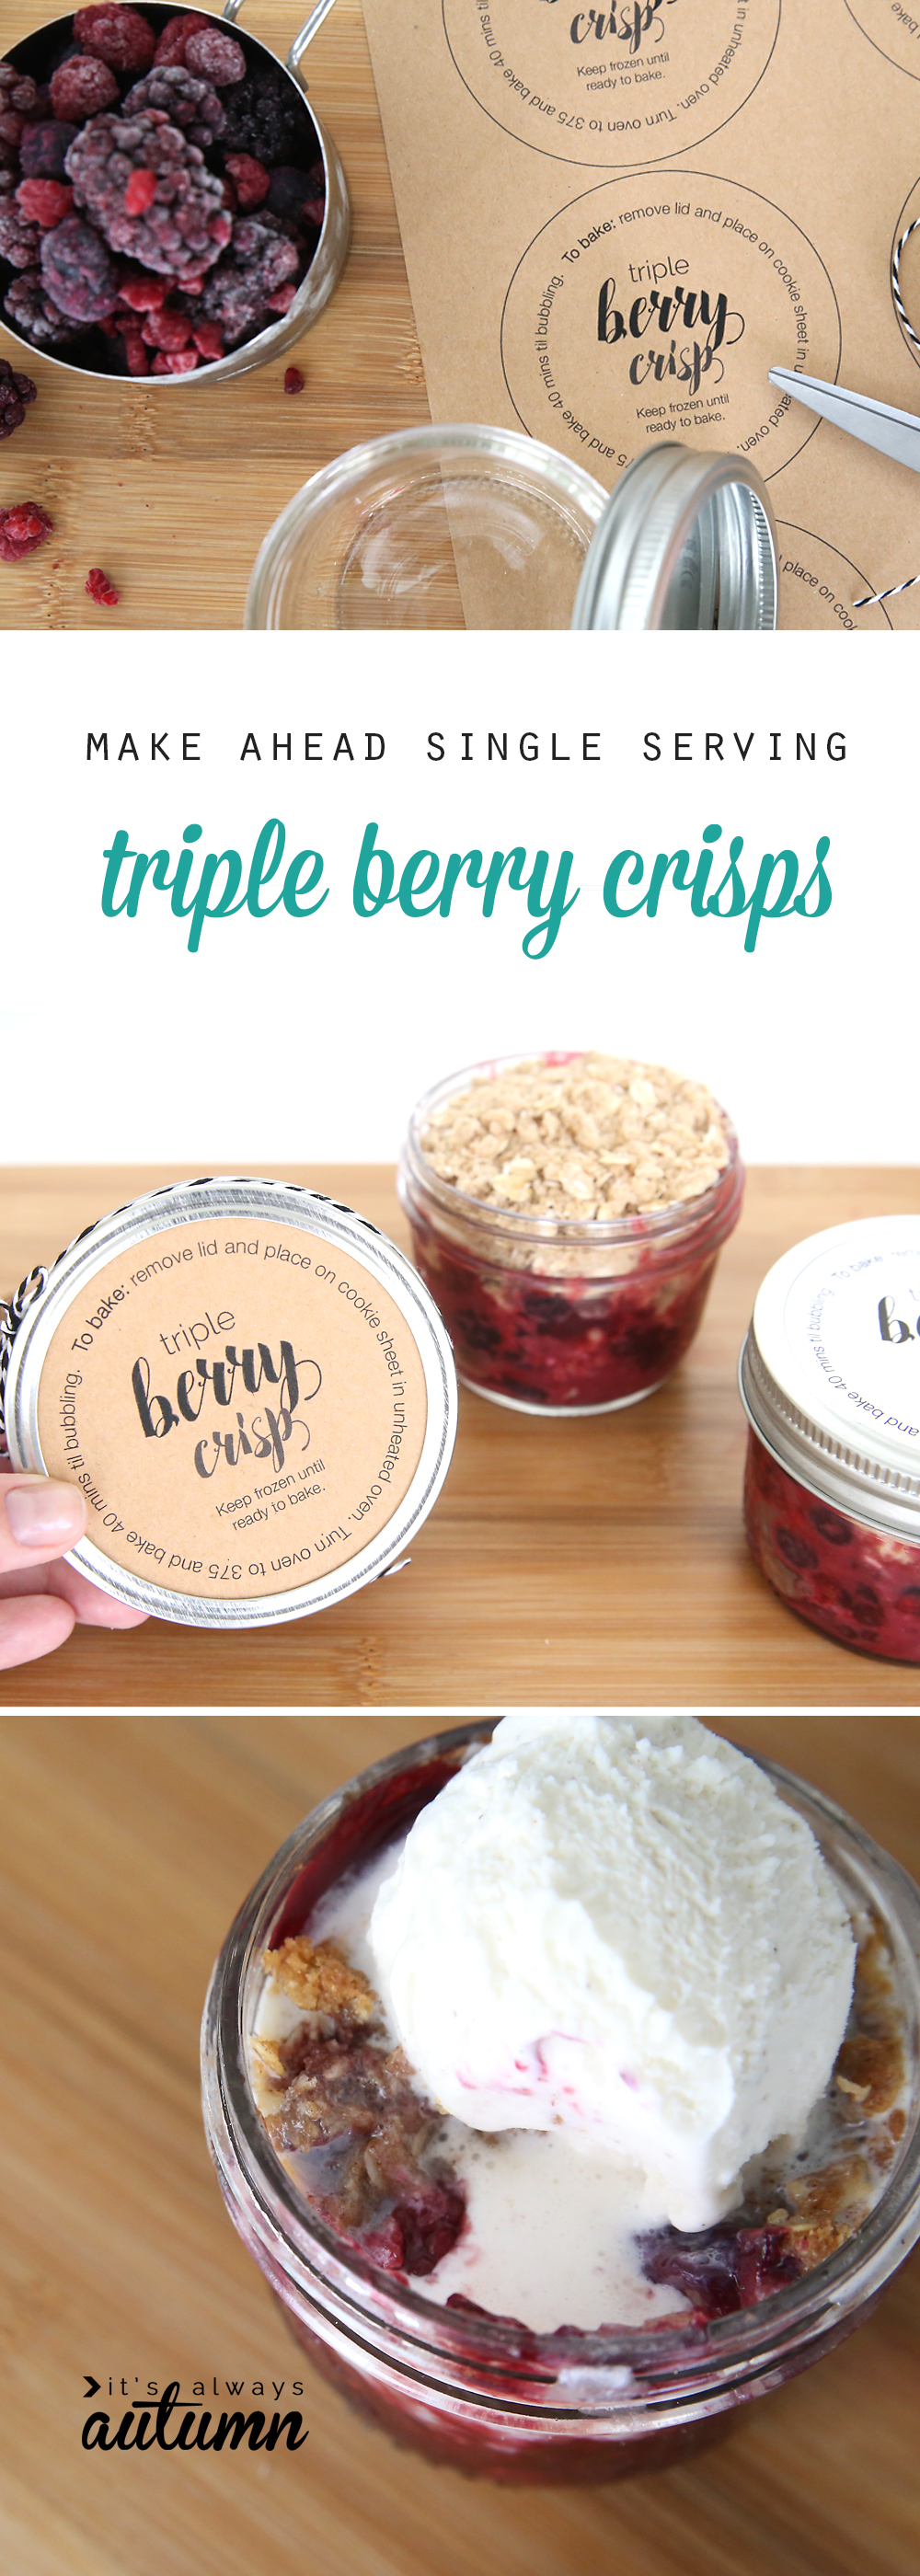 berries and printable tags; triple berry crisps in small mason jars